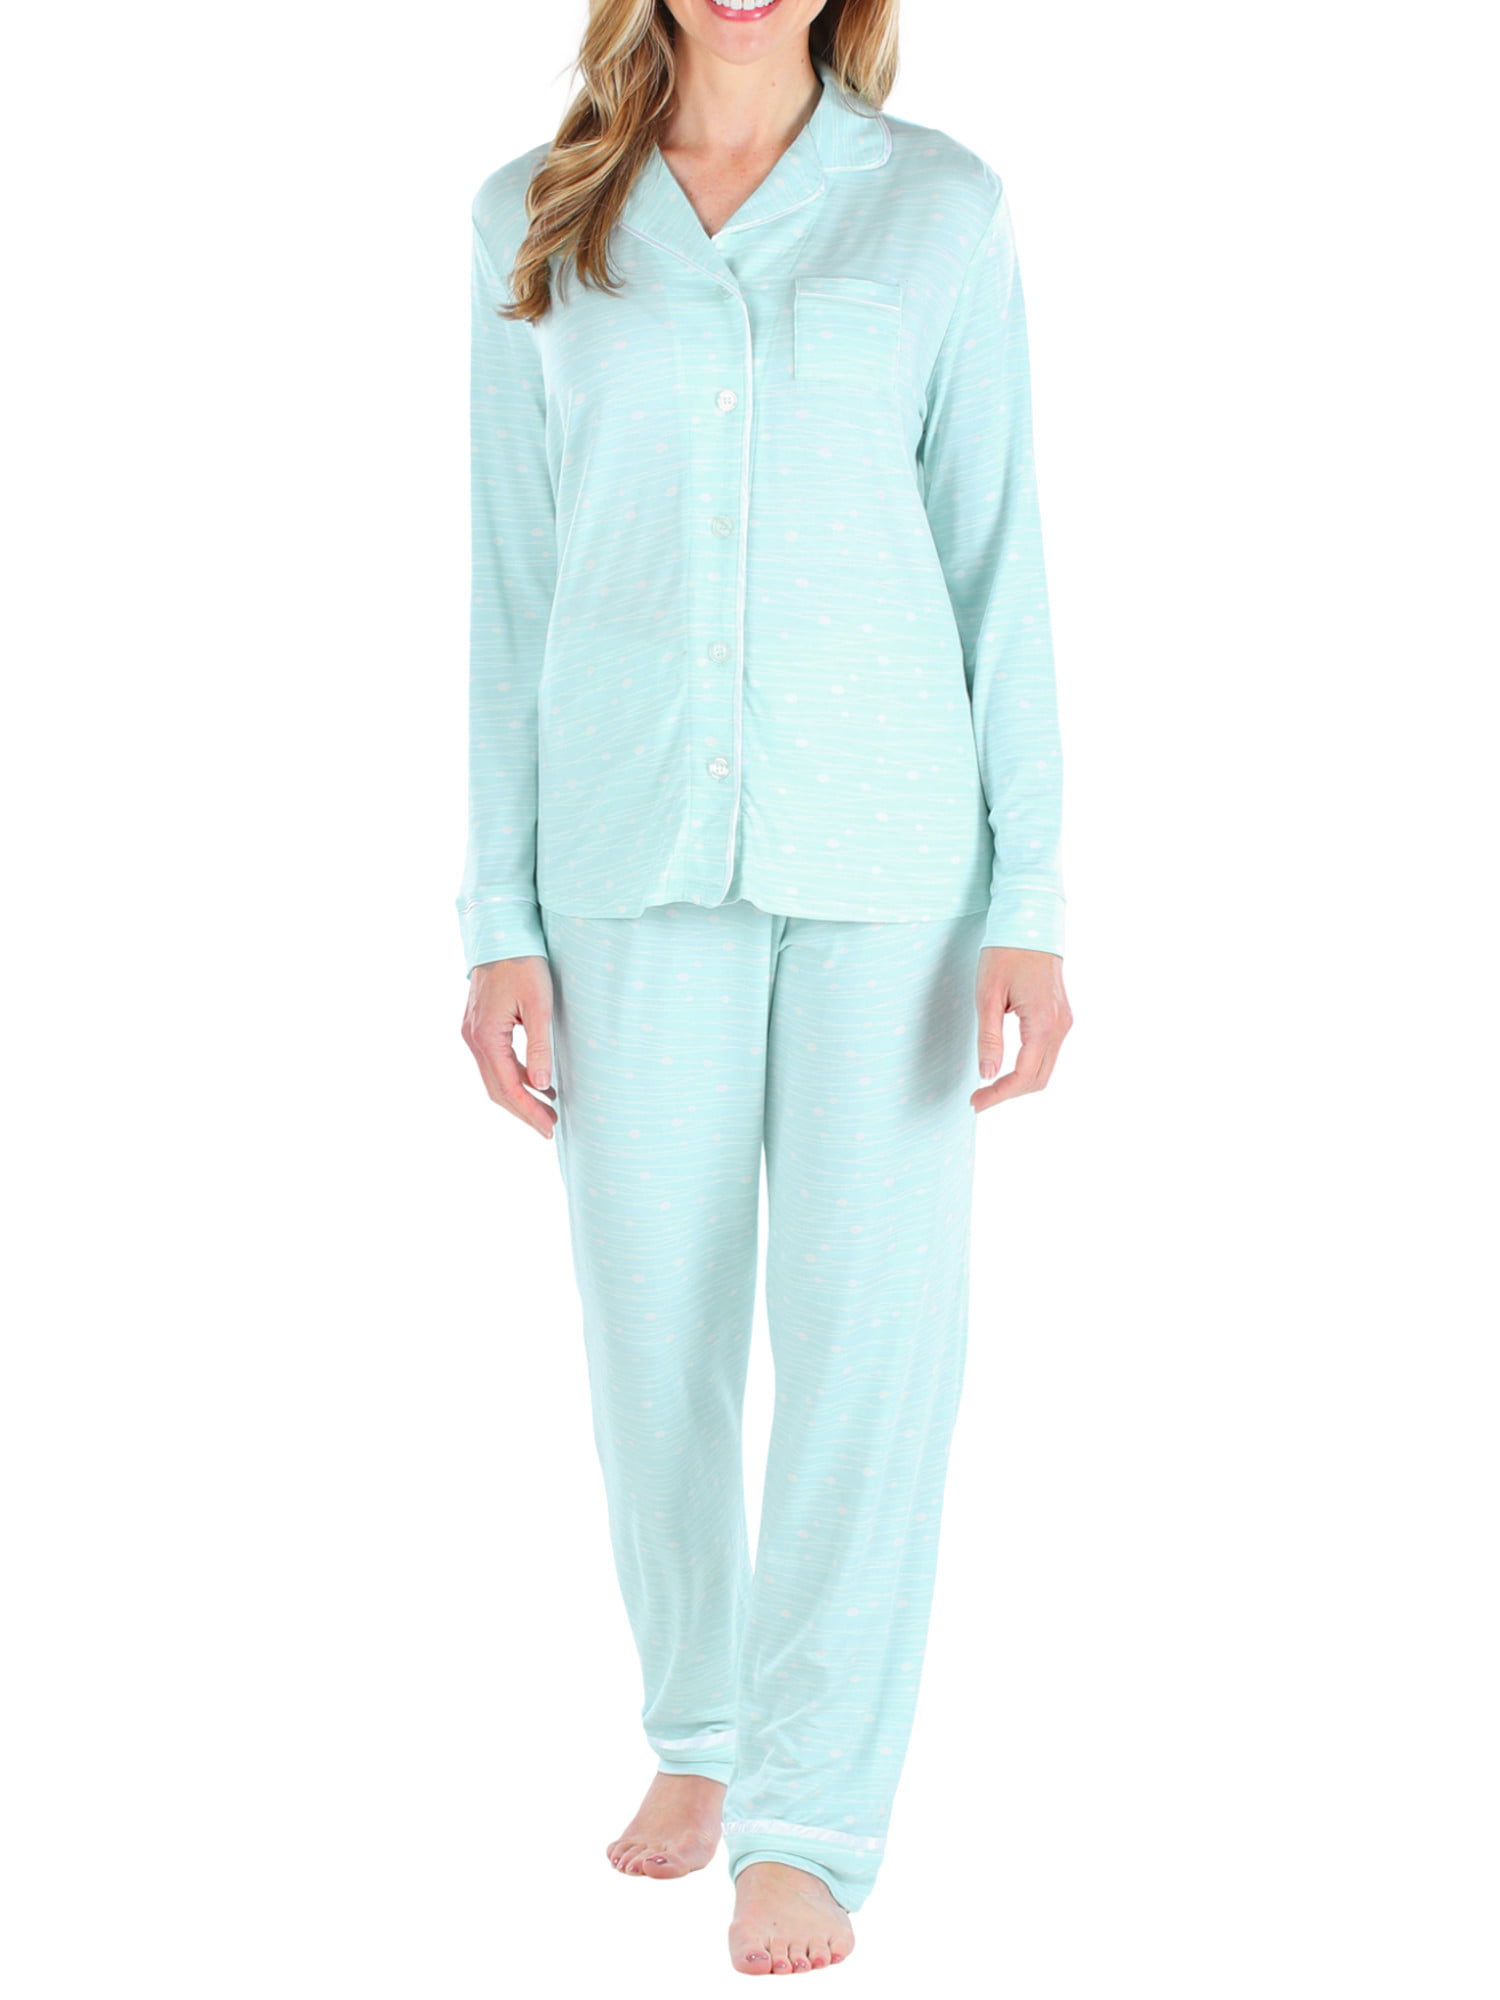 Women's Pajama Pant in Cotton Polyester Printed French Terry fabric with two side pockets 